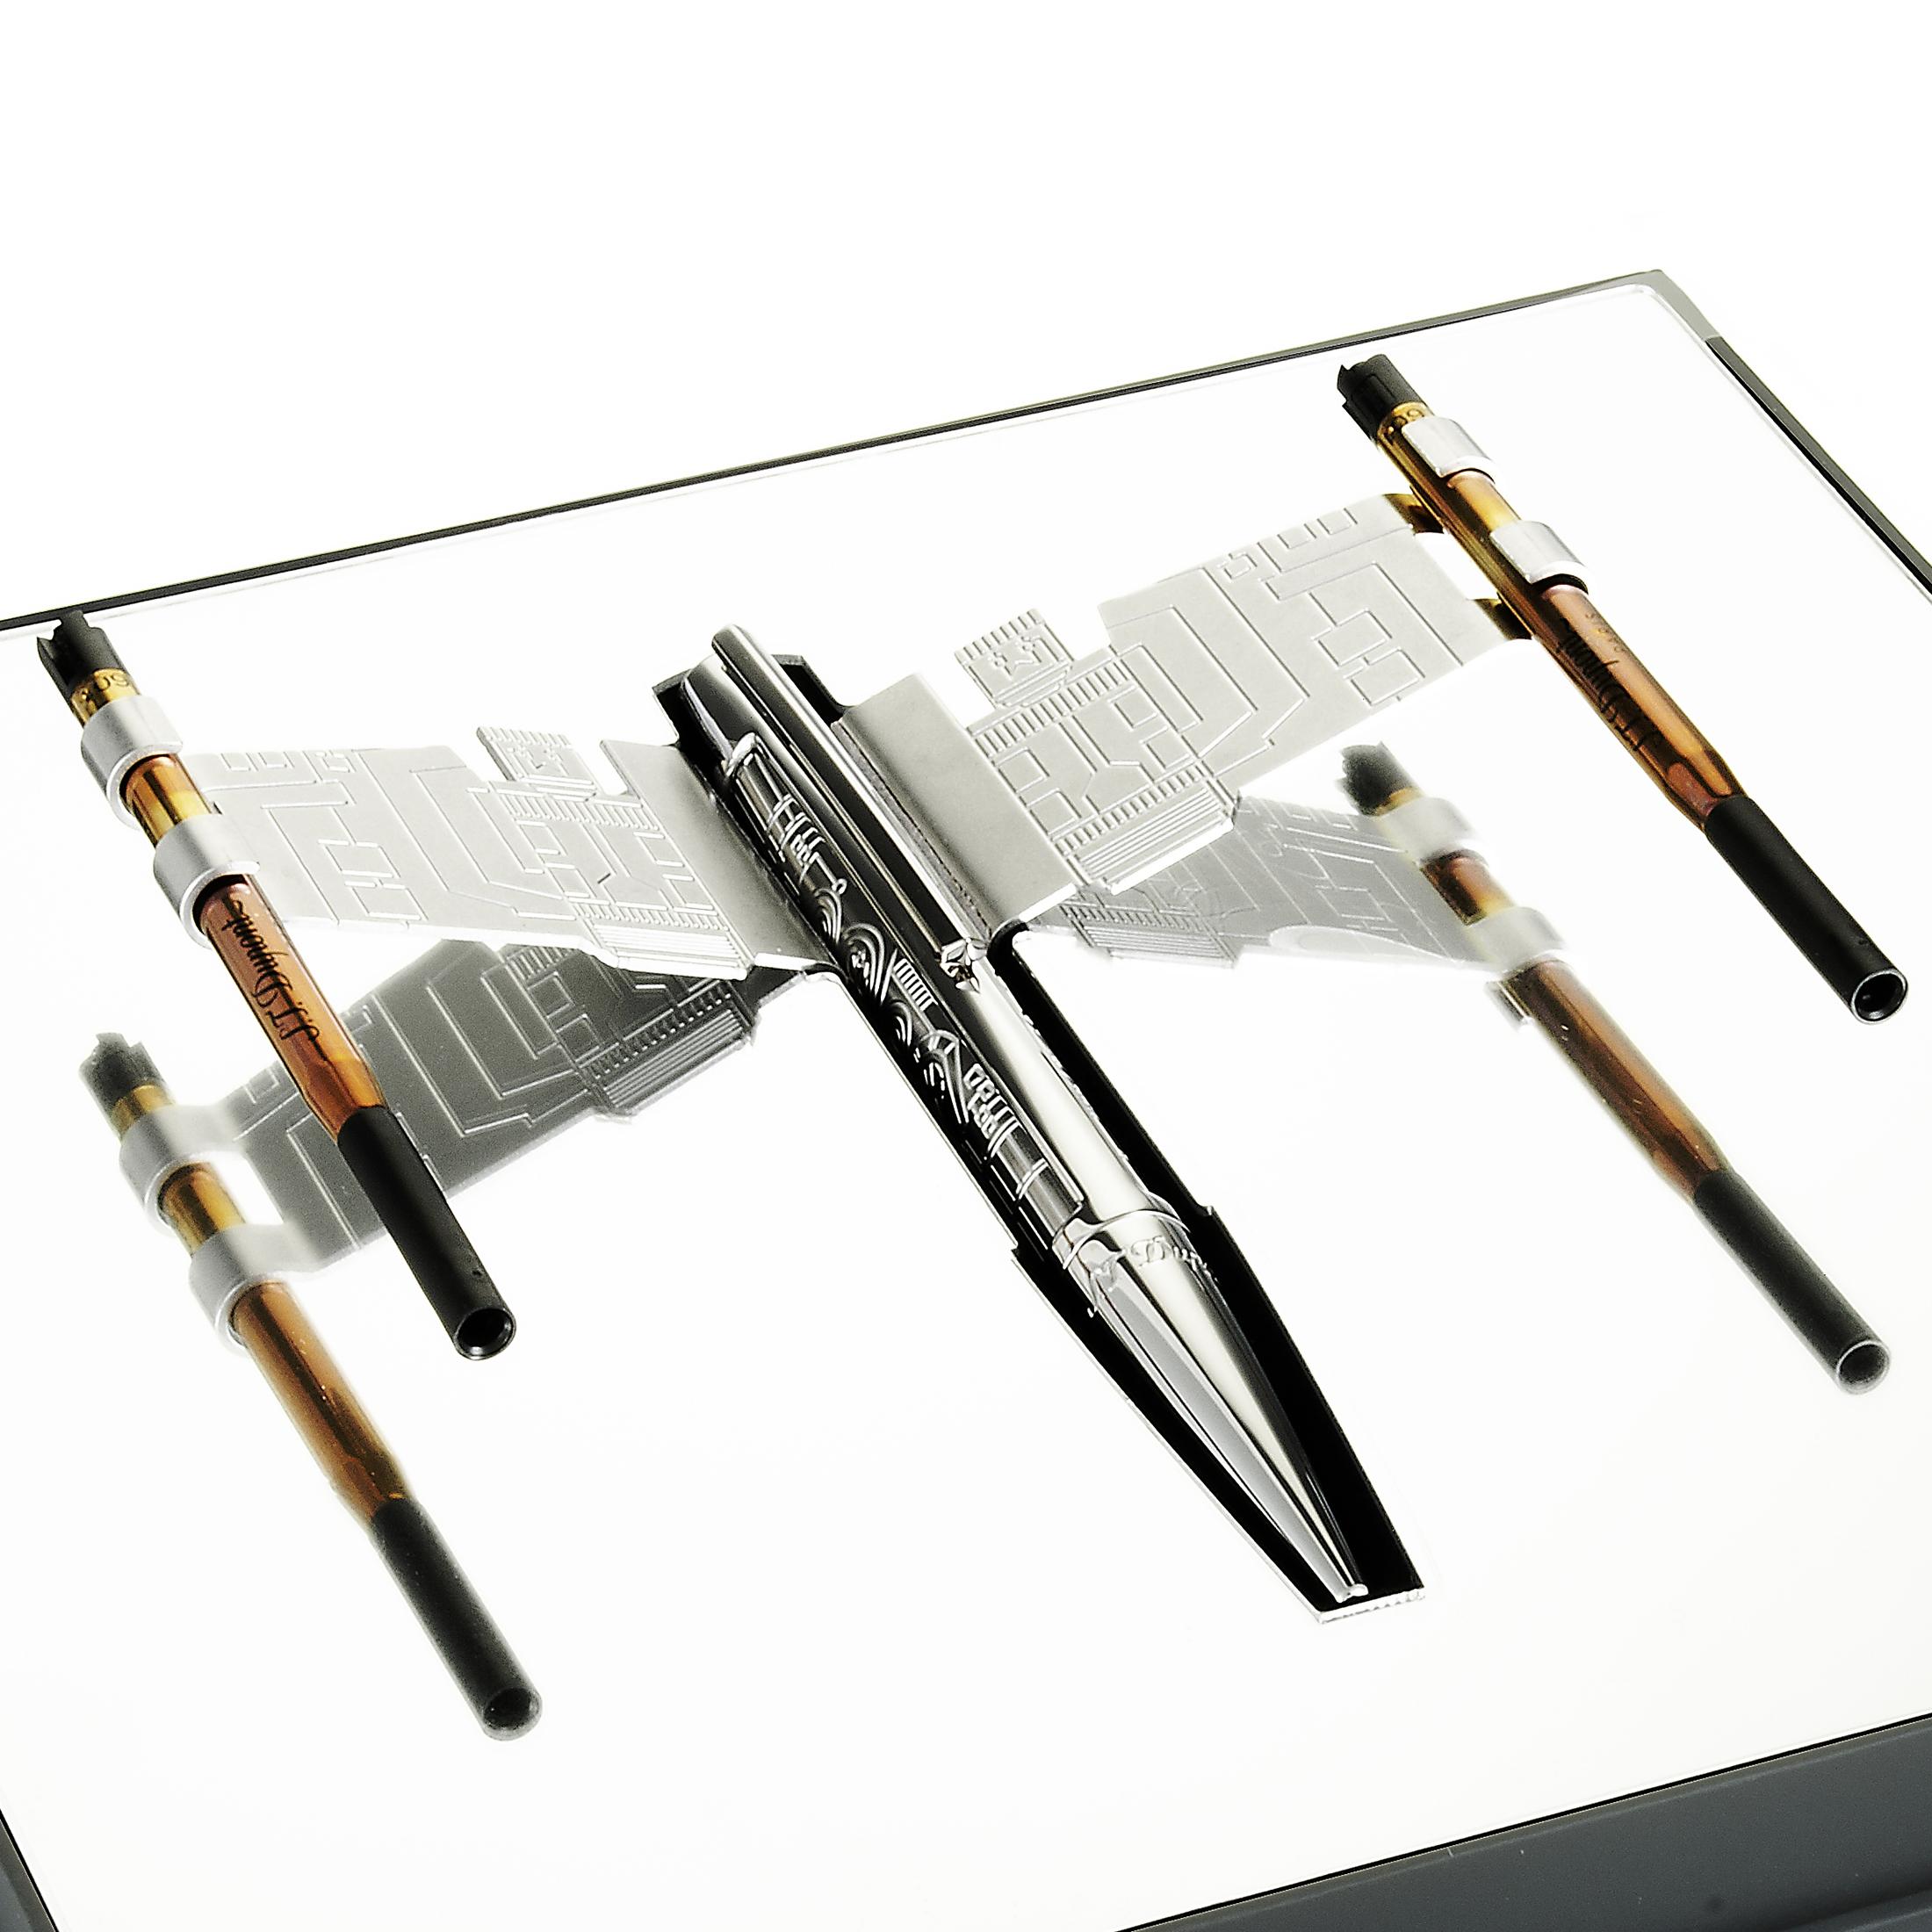 The design of this exceptional limited edition ballpoint pen from S.T. Dupont is inspired by the iconic X-wing starfighter from the Star Wars universe. The pen boasts palladium finish, engraved with a pattern that replicates the plan of the X-Wing